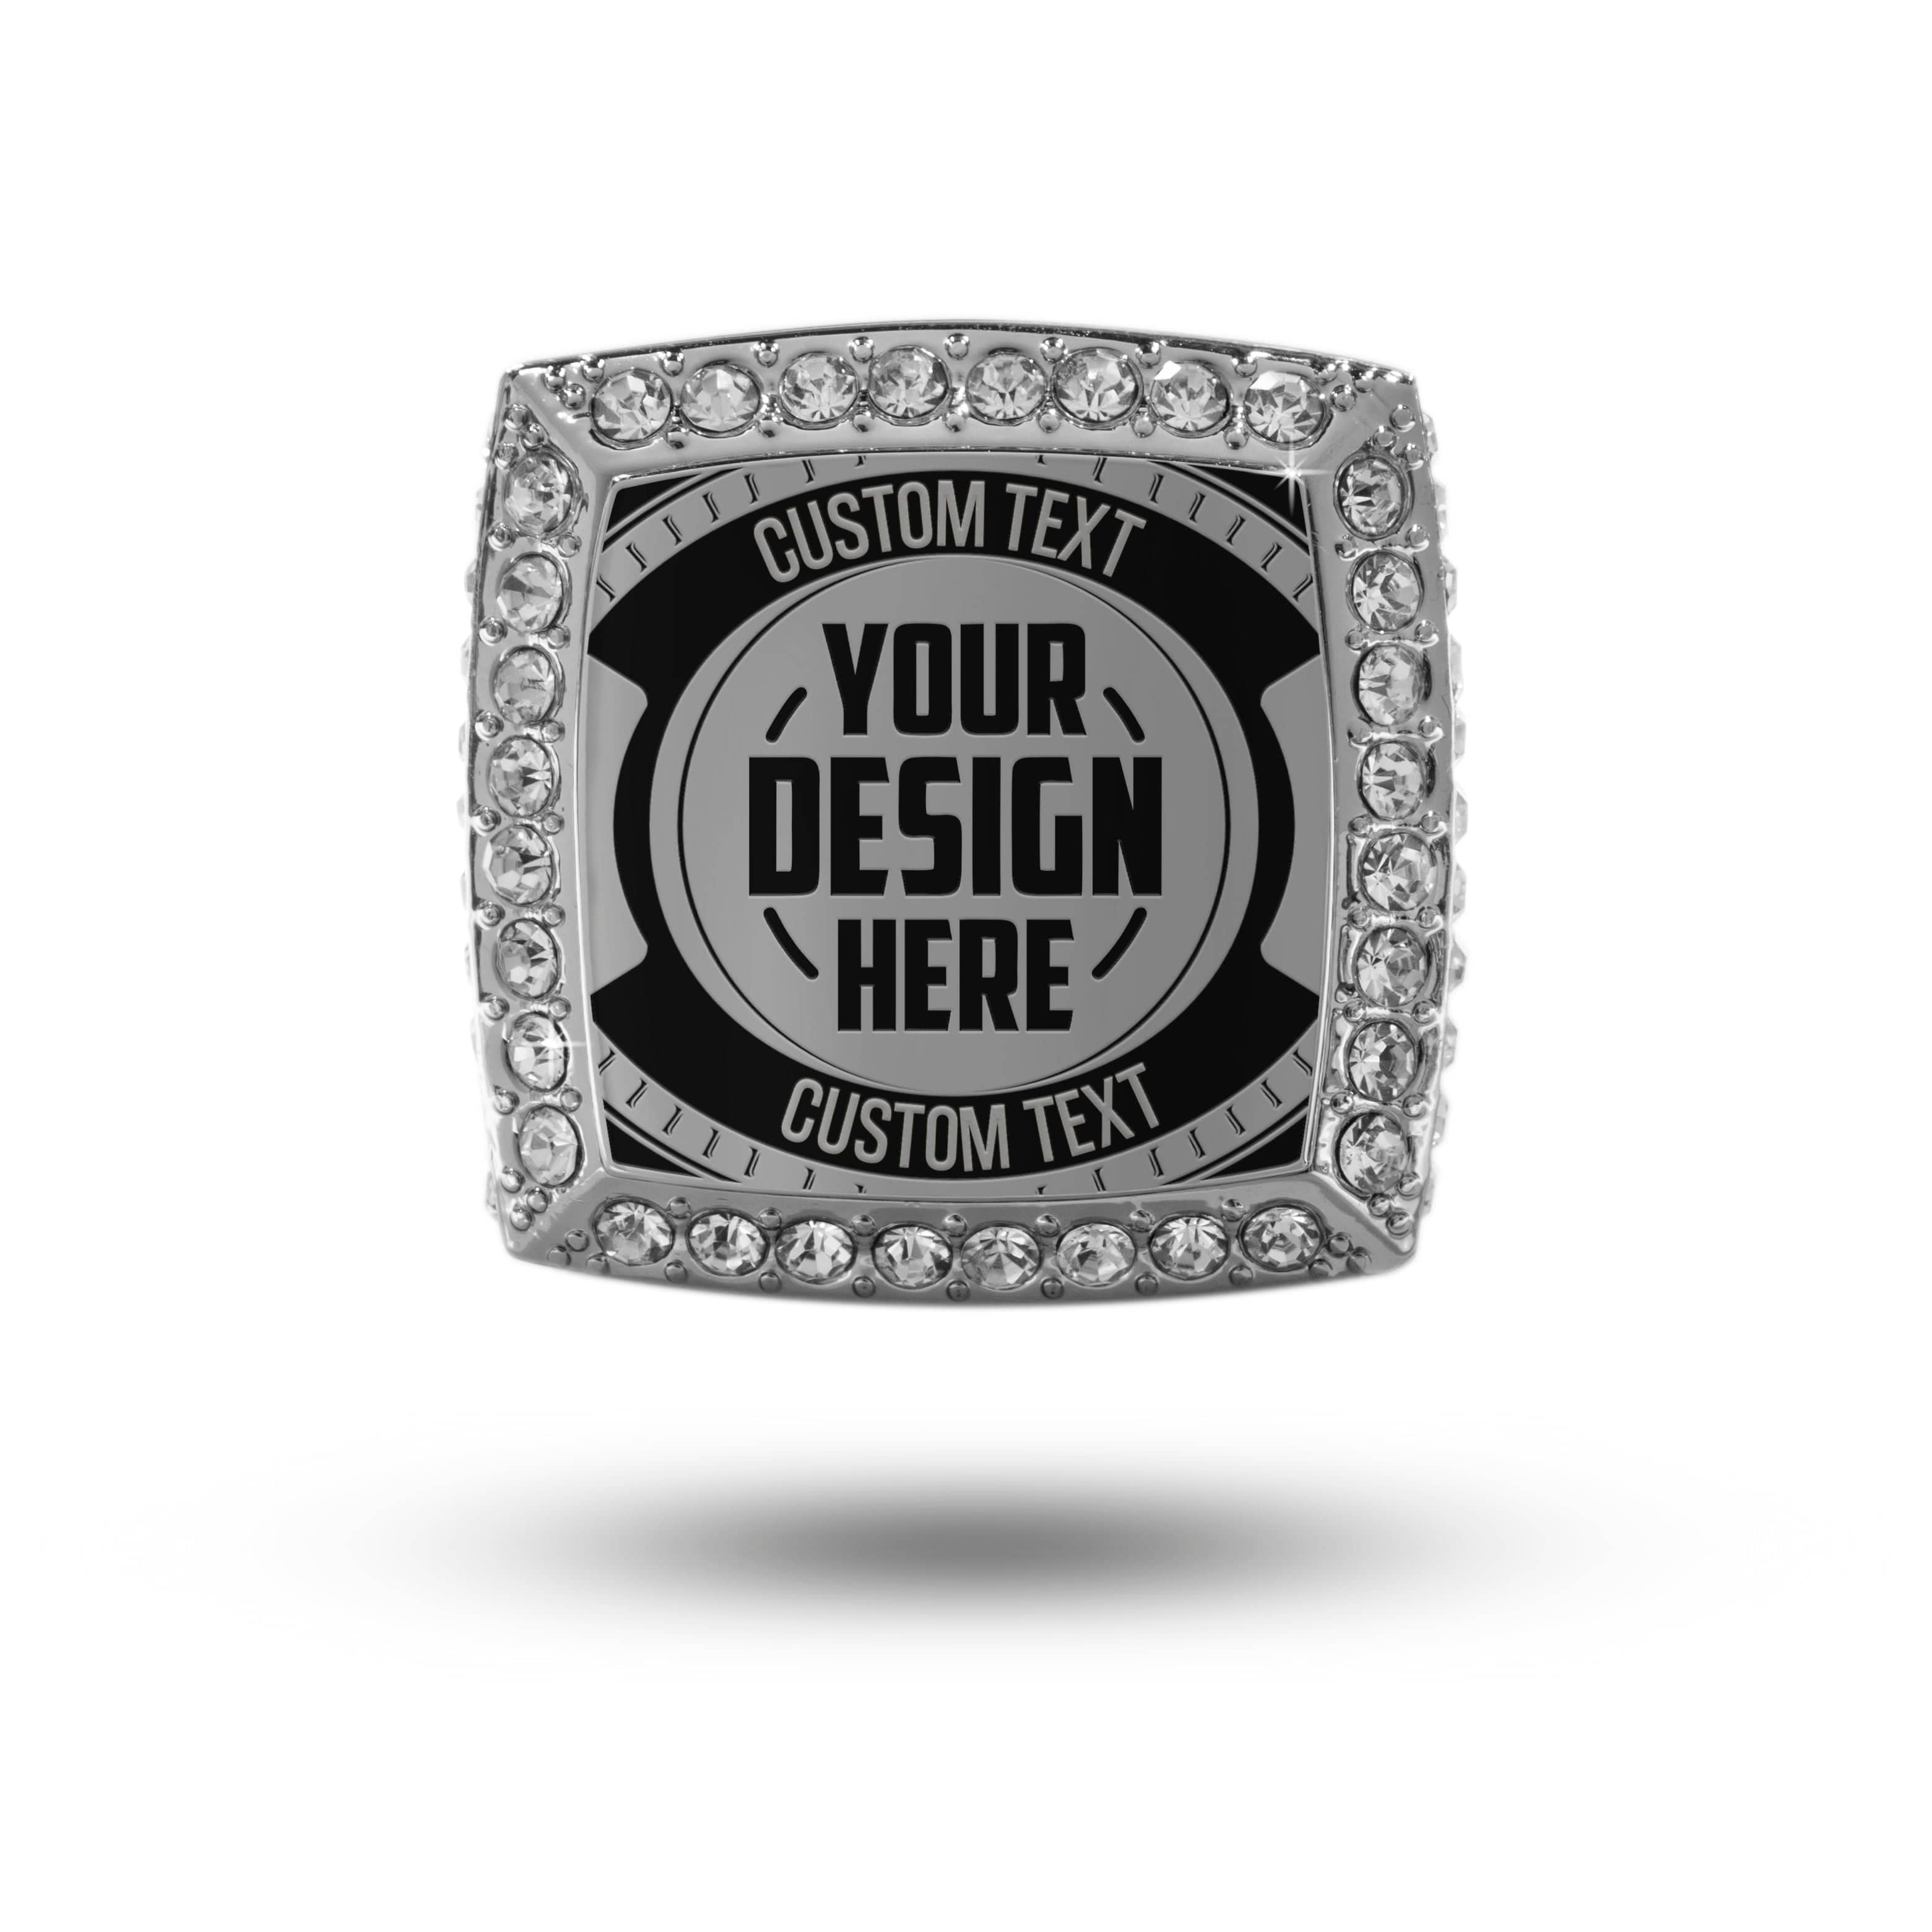 Championship Ring with custom text and color - basketball, baseball,  football, hockey - high school, college sports